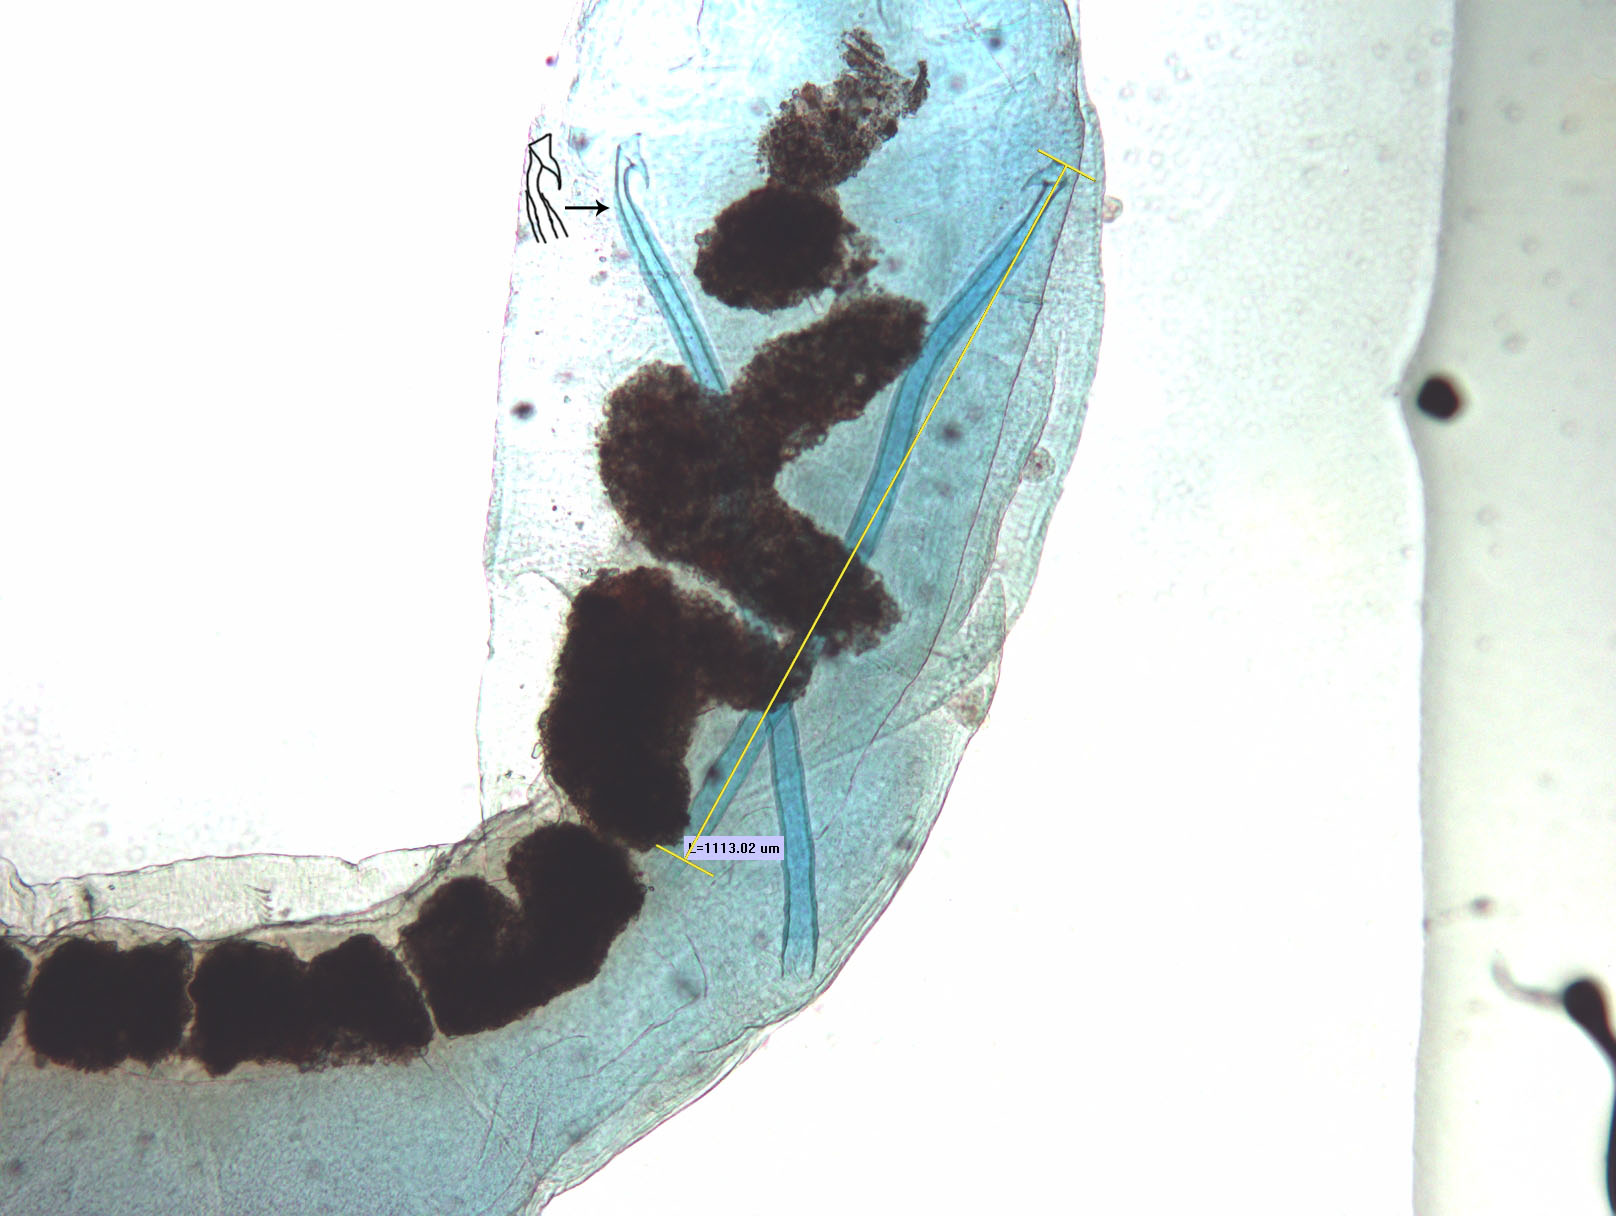 A microscope photo of the reproductive organs of a worm. The penis sheaths are very long, and one has a measuring bar that is labelled "L=1113.02 µm." The other one has a drawing next to it with an arrow pointed to it, showing a triangular head plate with a pointed lobe at the bottom, and the shaft has a double wall.